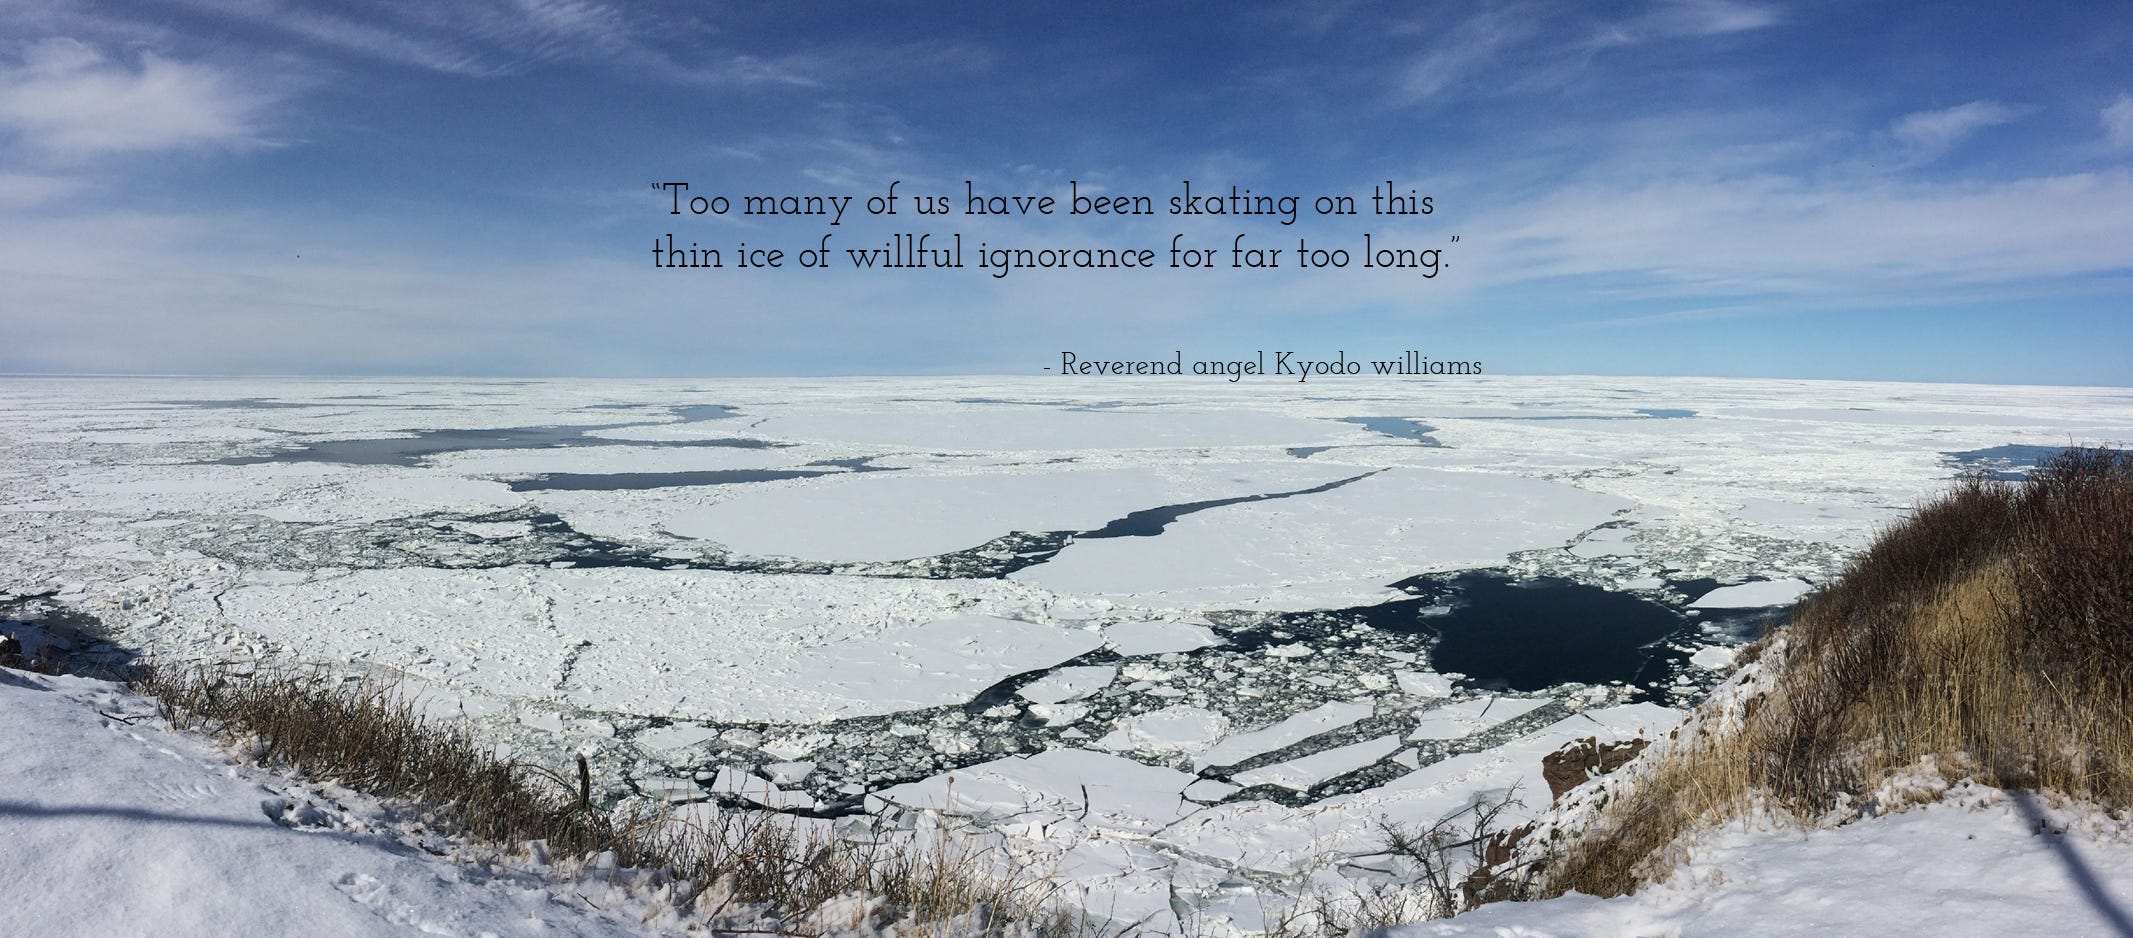 Photo of the Guelph of Saint Lawrence full of sea ice, below a cloud streaked blue sky. Quoted text in the sky reads: “Too many of us have been skating on this thin ice of willful ignorance for far too long.” — Reverence angel Kyodo williams